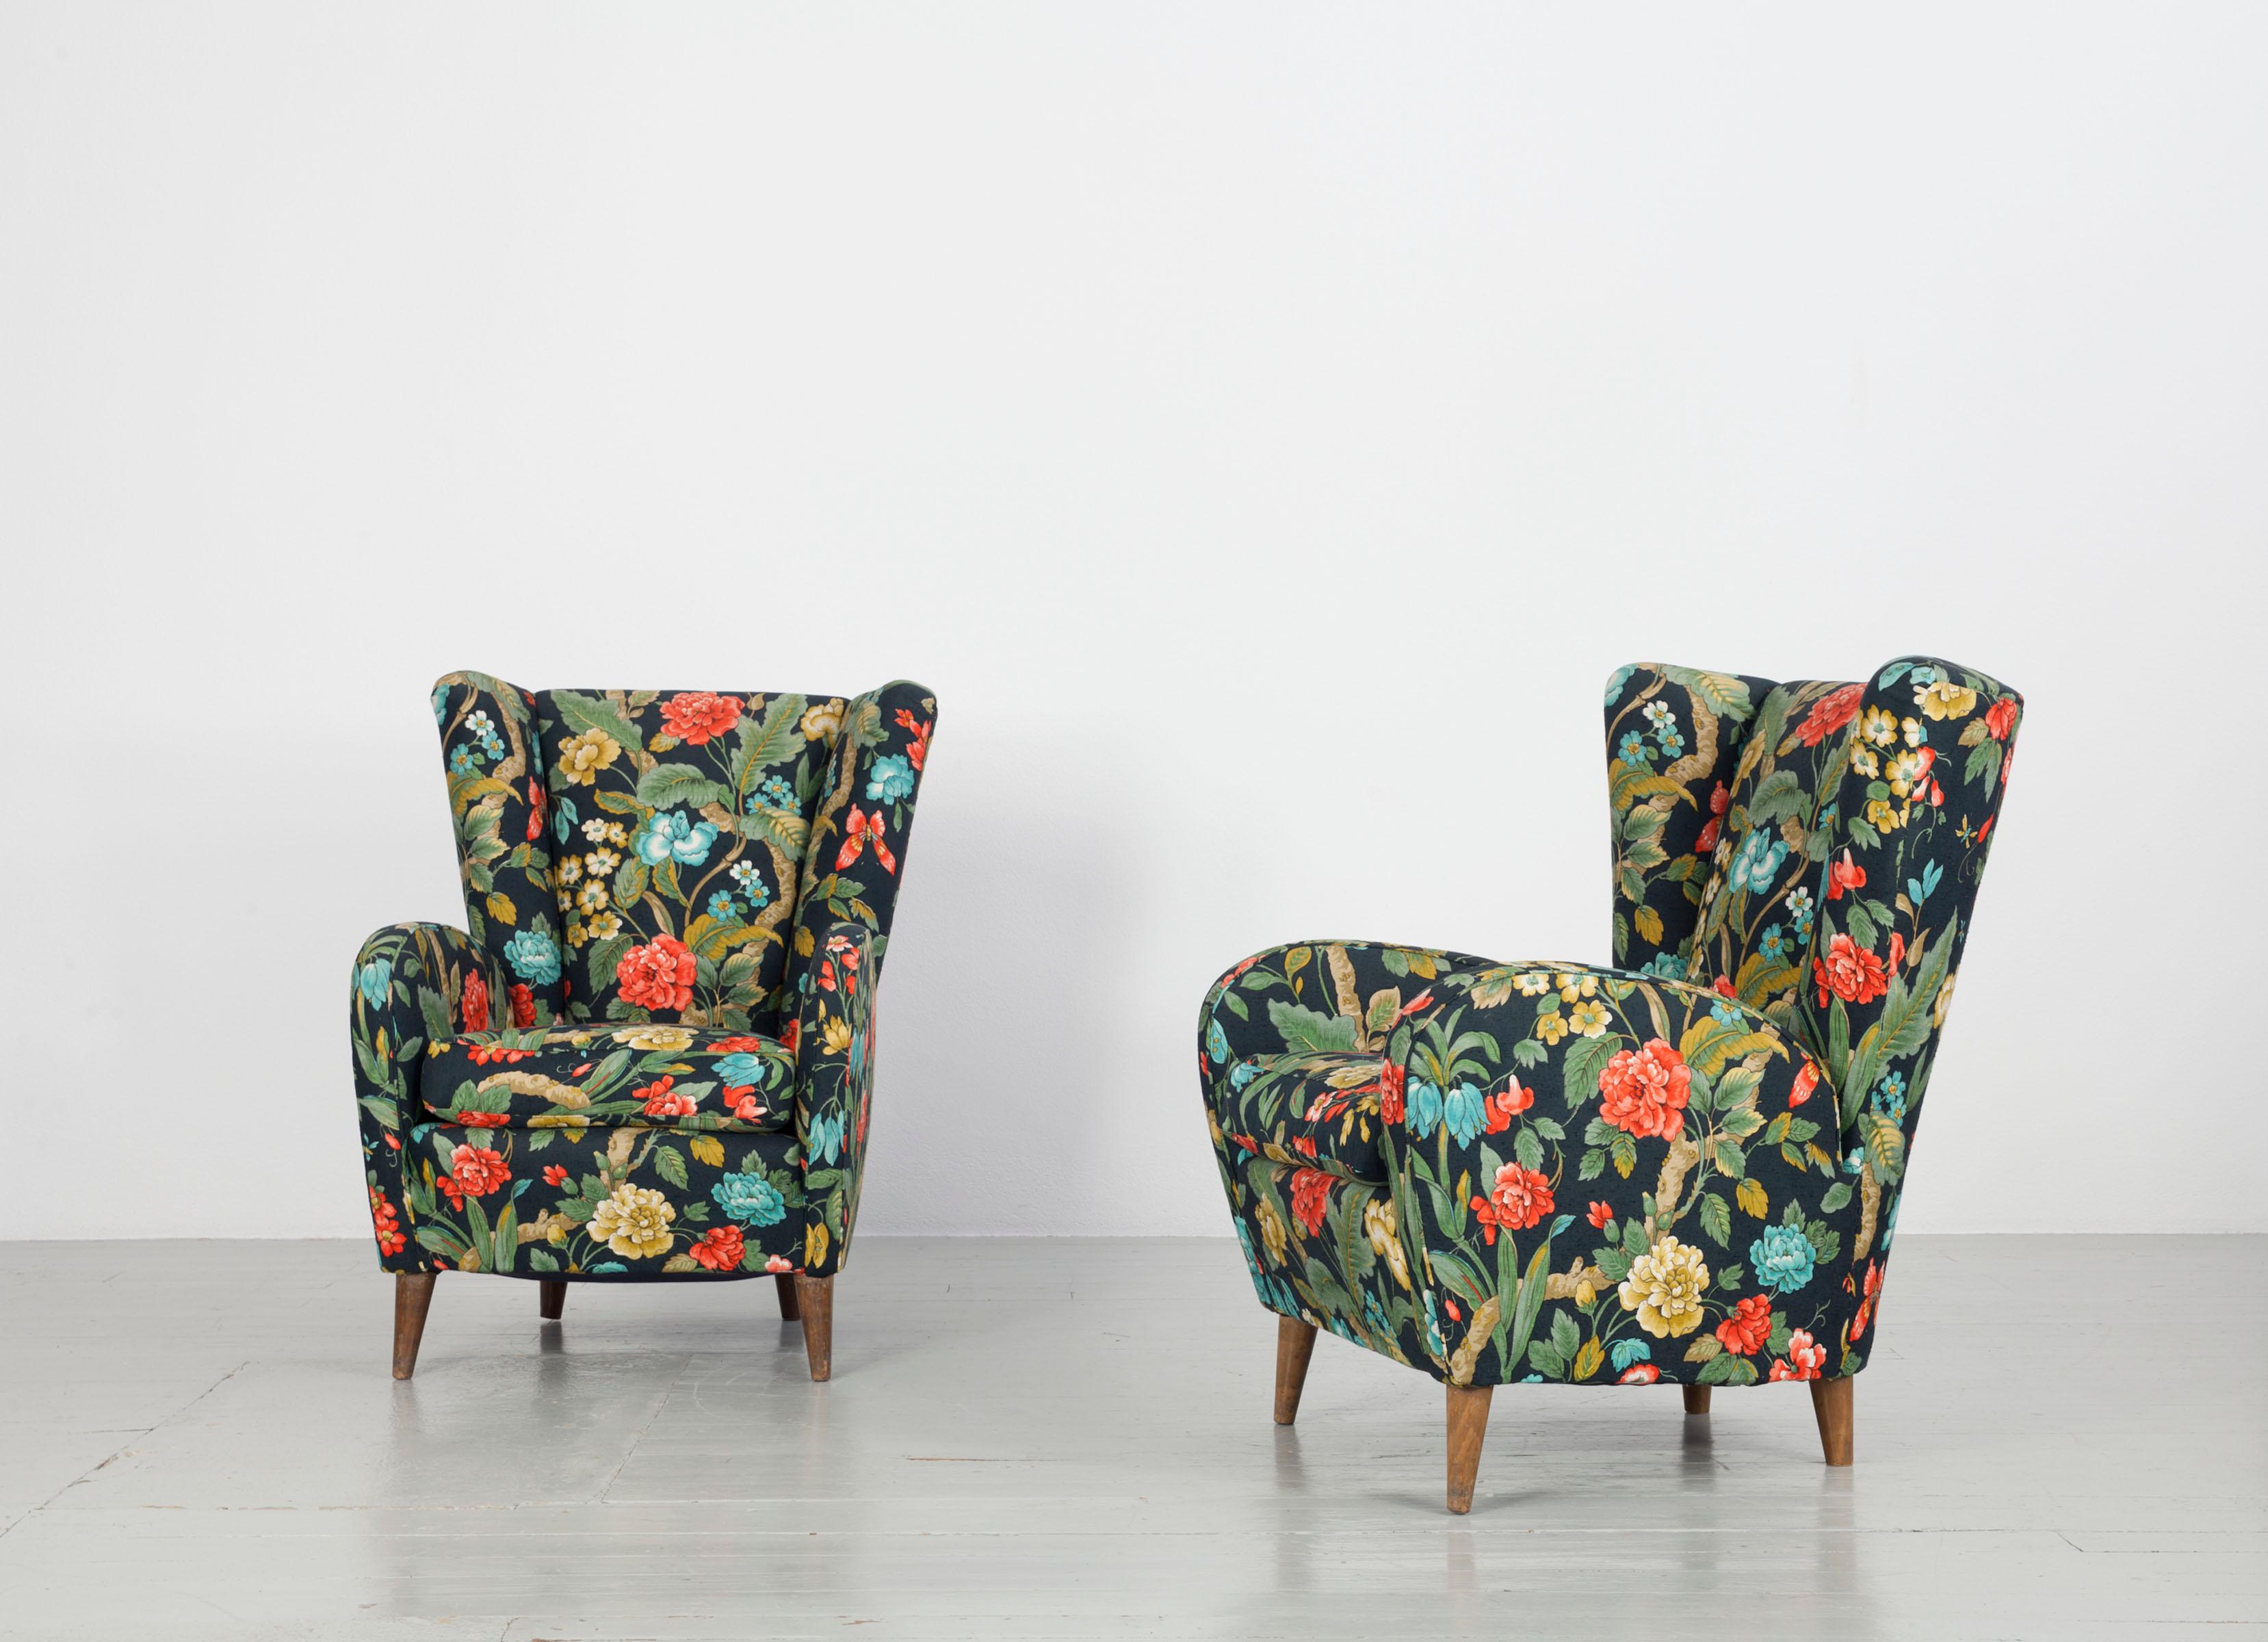 This Italian pair of armchairs in the style of Paolo Buffa was made in the 1950s. The particularly comfortable pieces of furniture catch the eye with their colourful floral fabric cover. The upholstery and the shape of the wing chairs support the